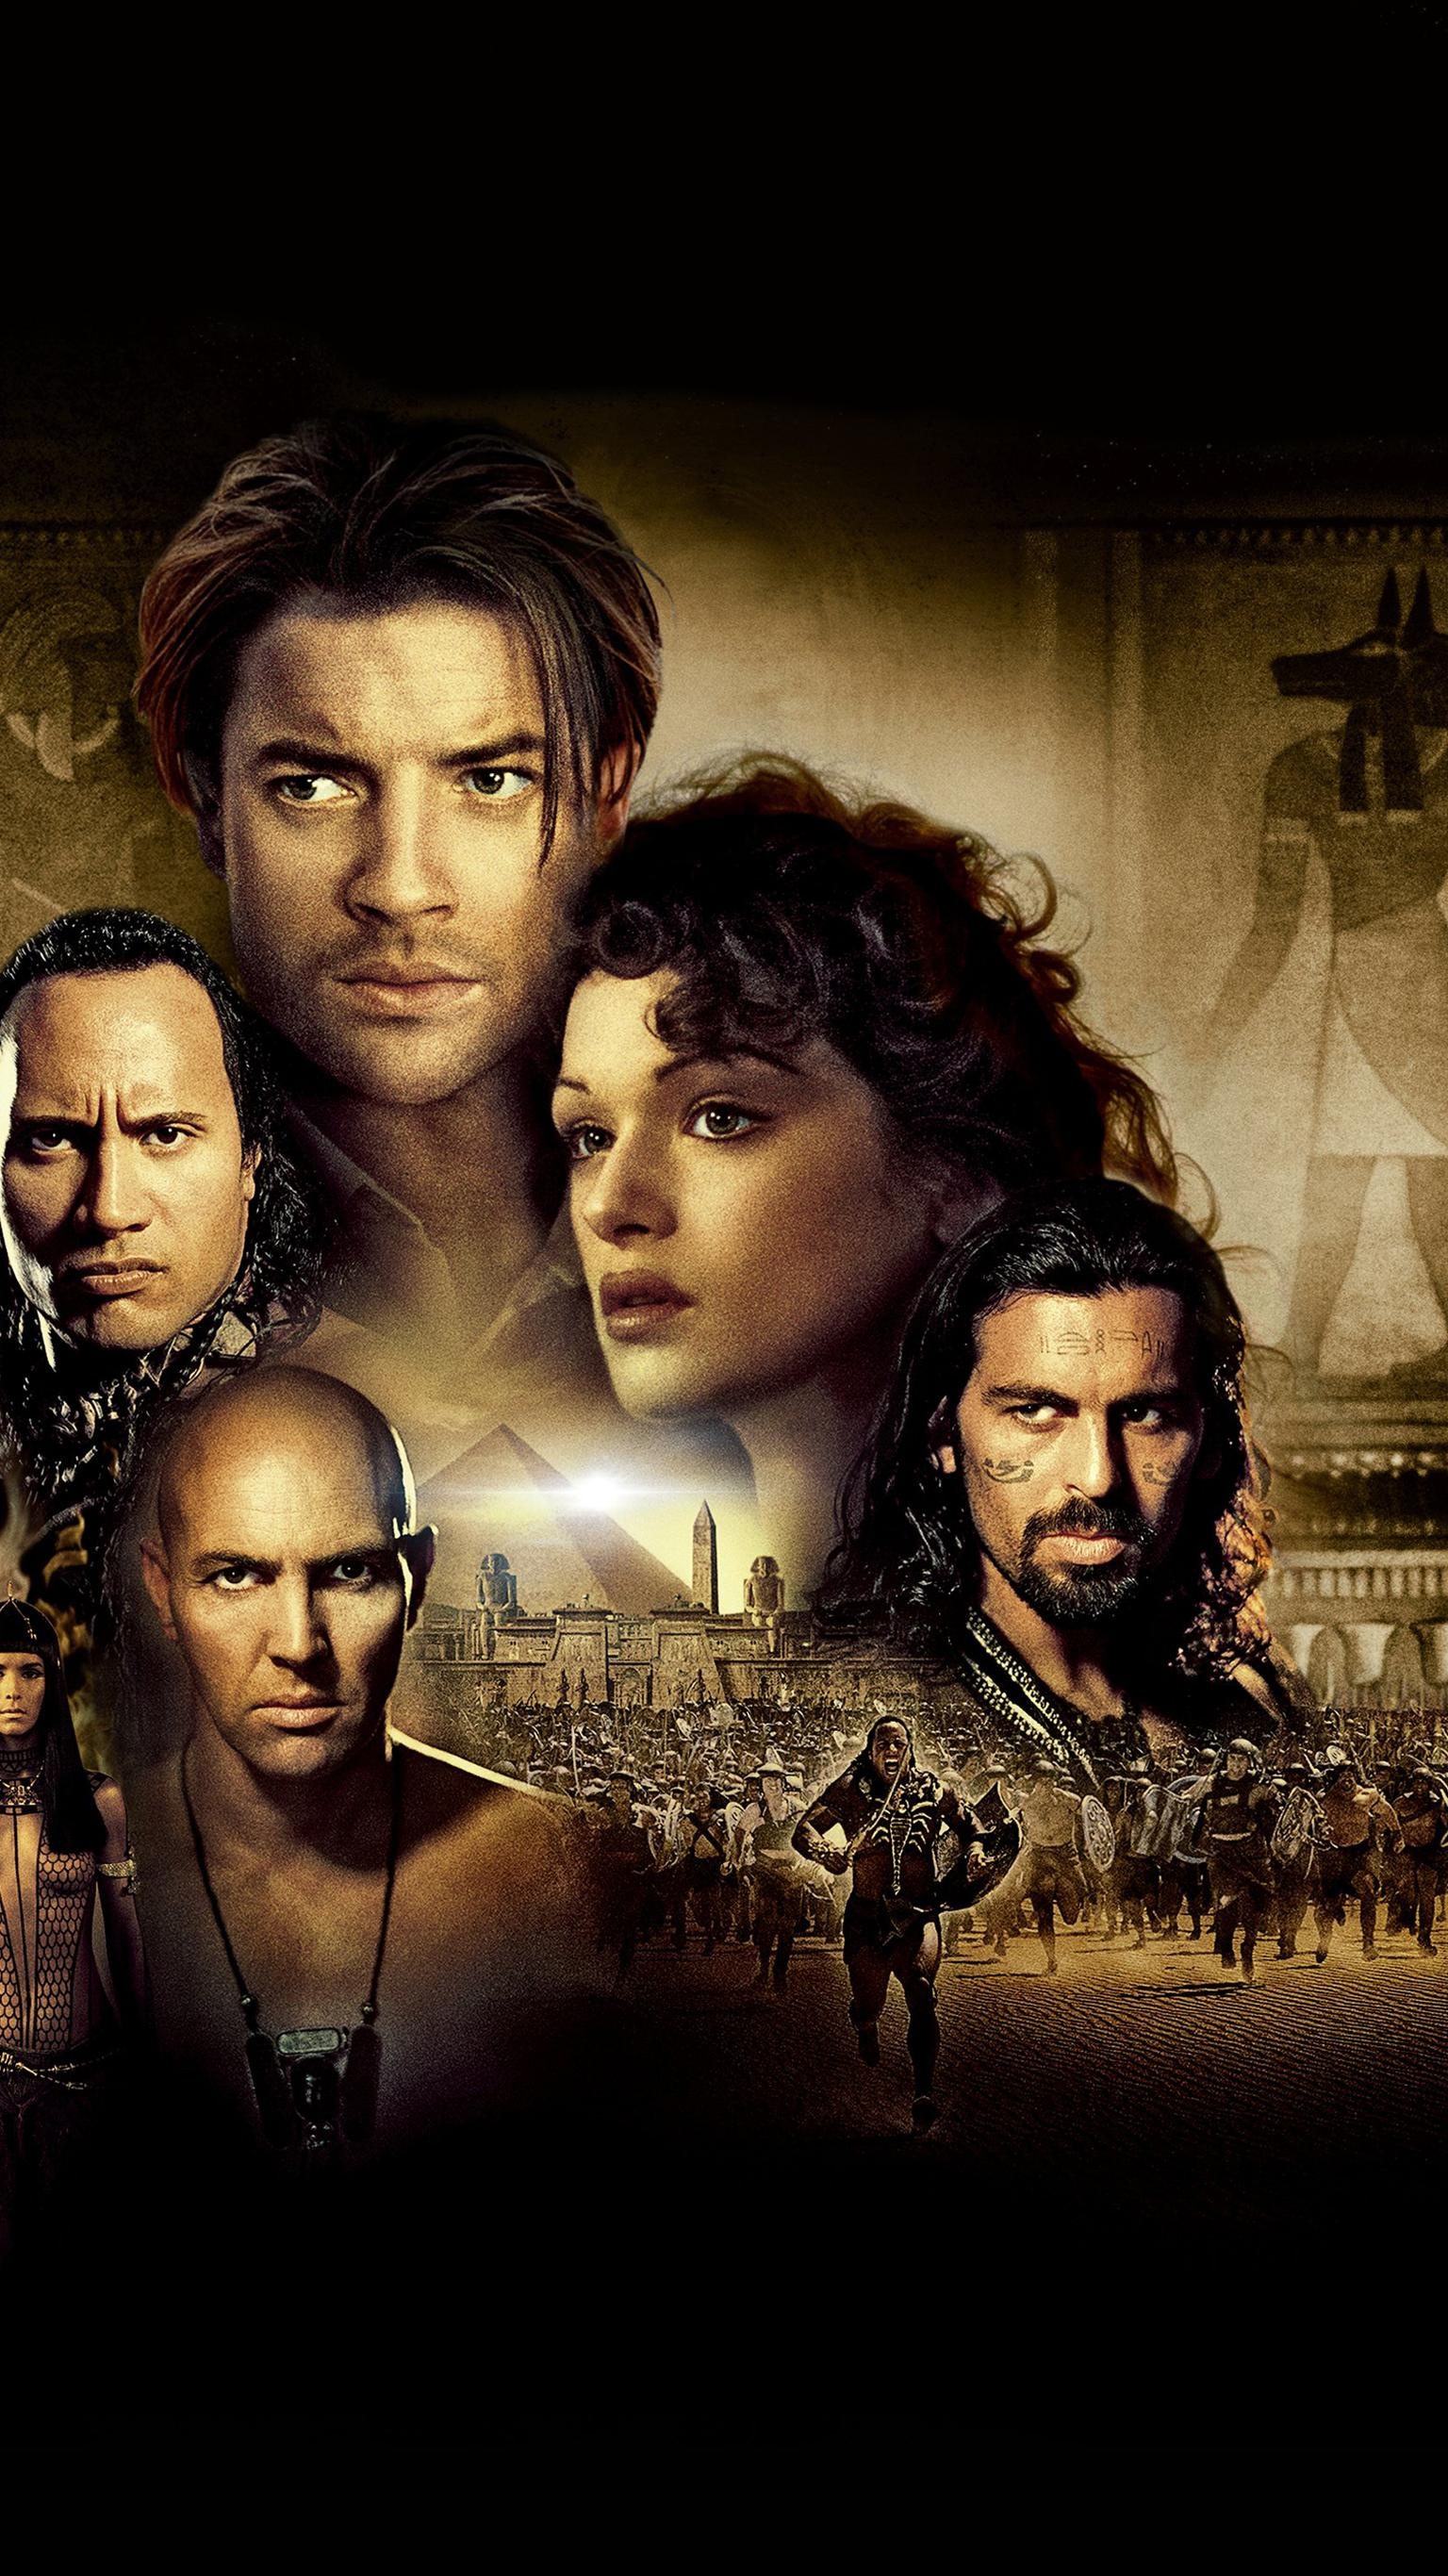 The Mummy (Movie): Brendan Fraser as Rick O'Connell, a treasure hunter and former Legionnaire. 1540x2740 HD Wallpaper.